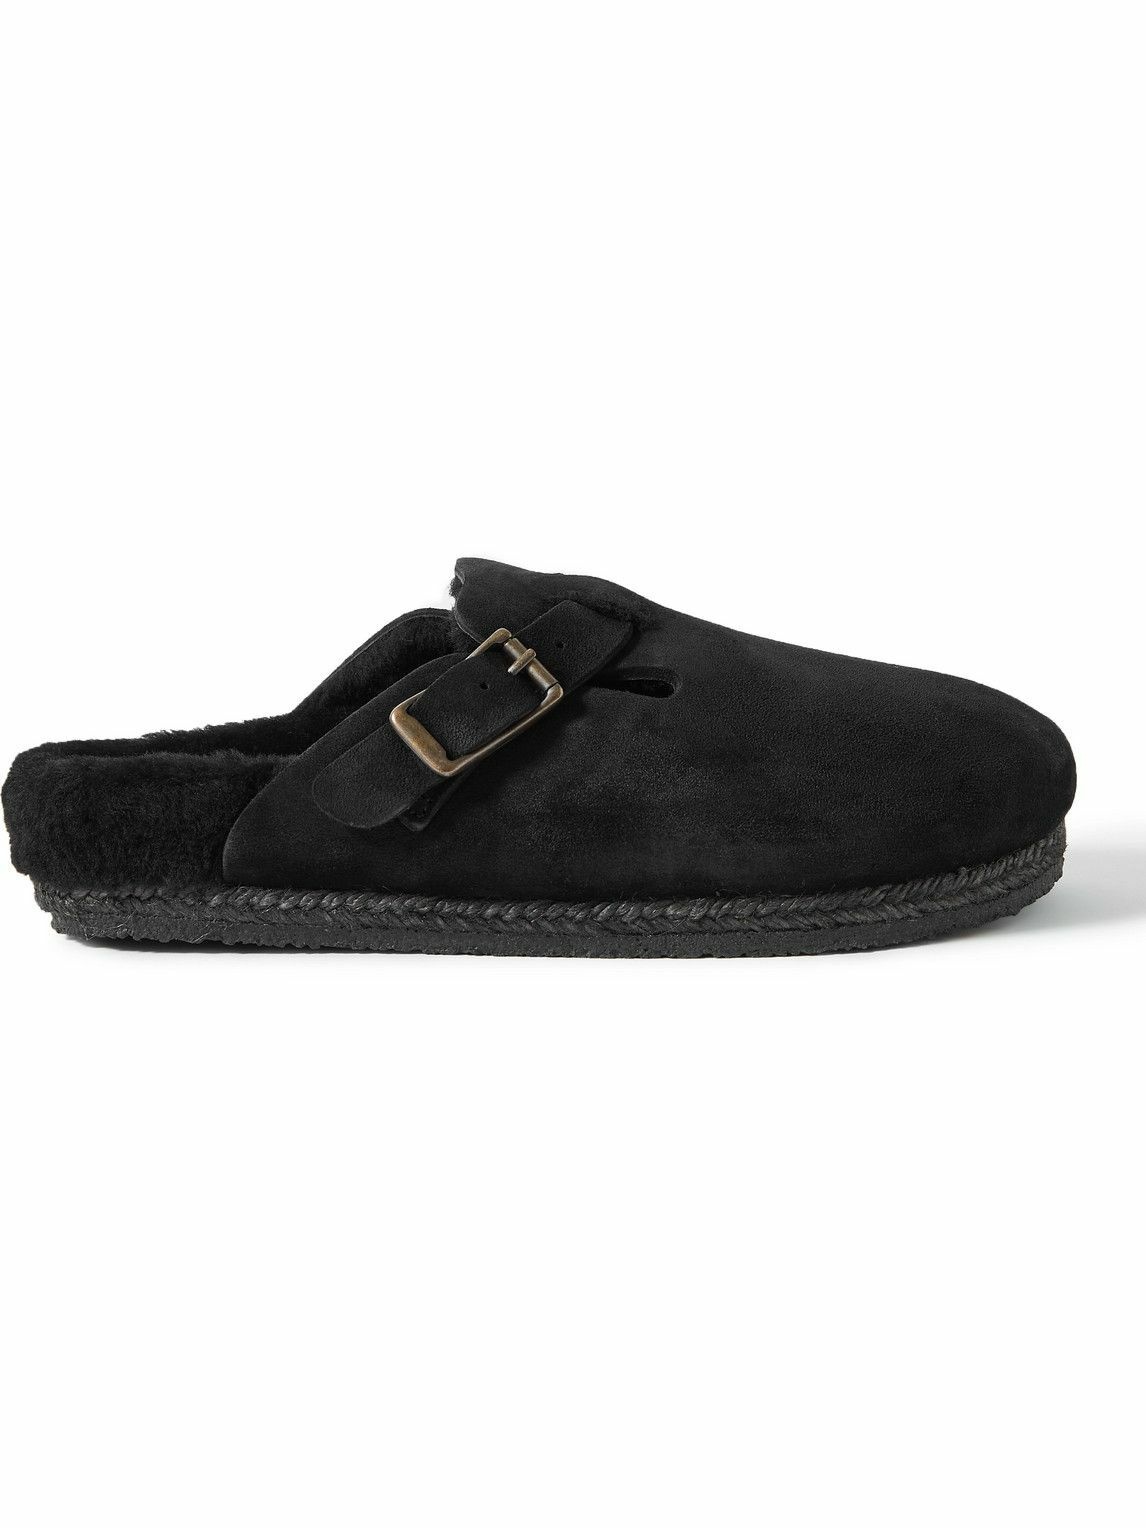 Photo: Yuketen - Sal-1 Shearling-Lined Suede Sandals - Black